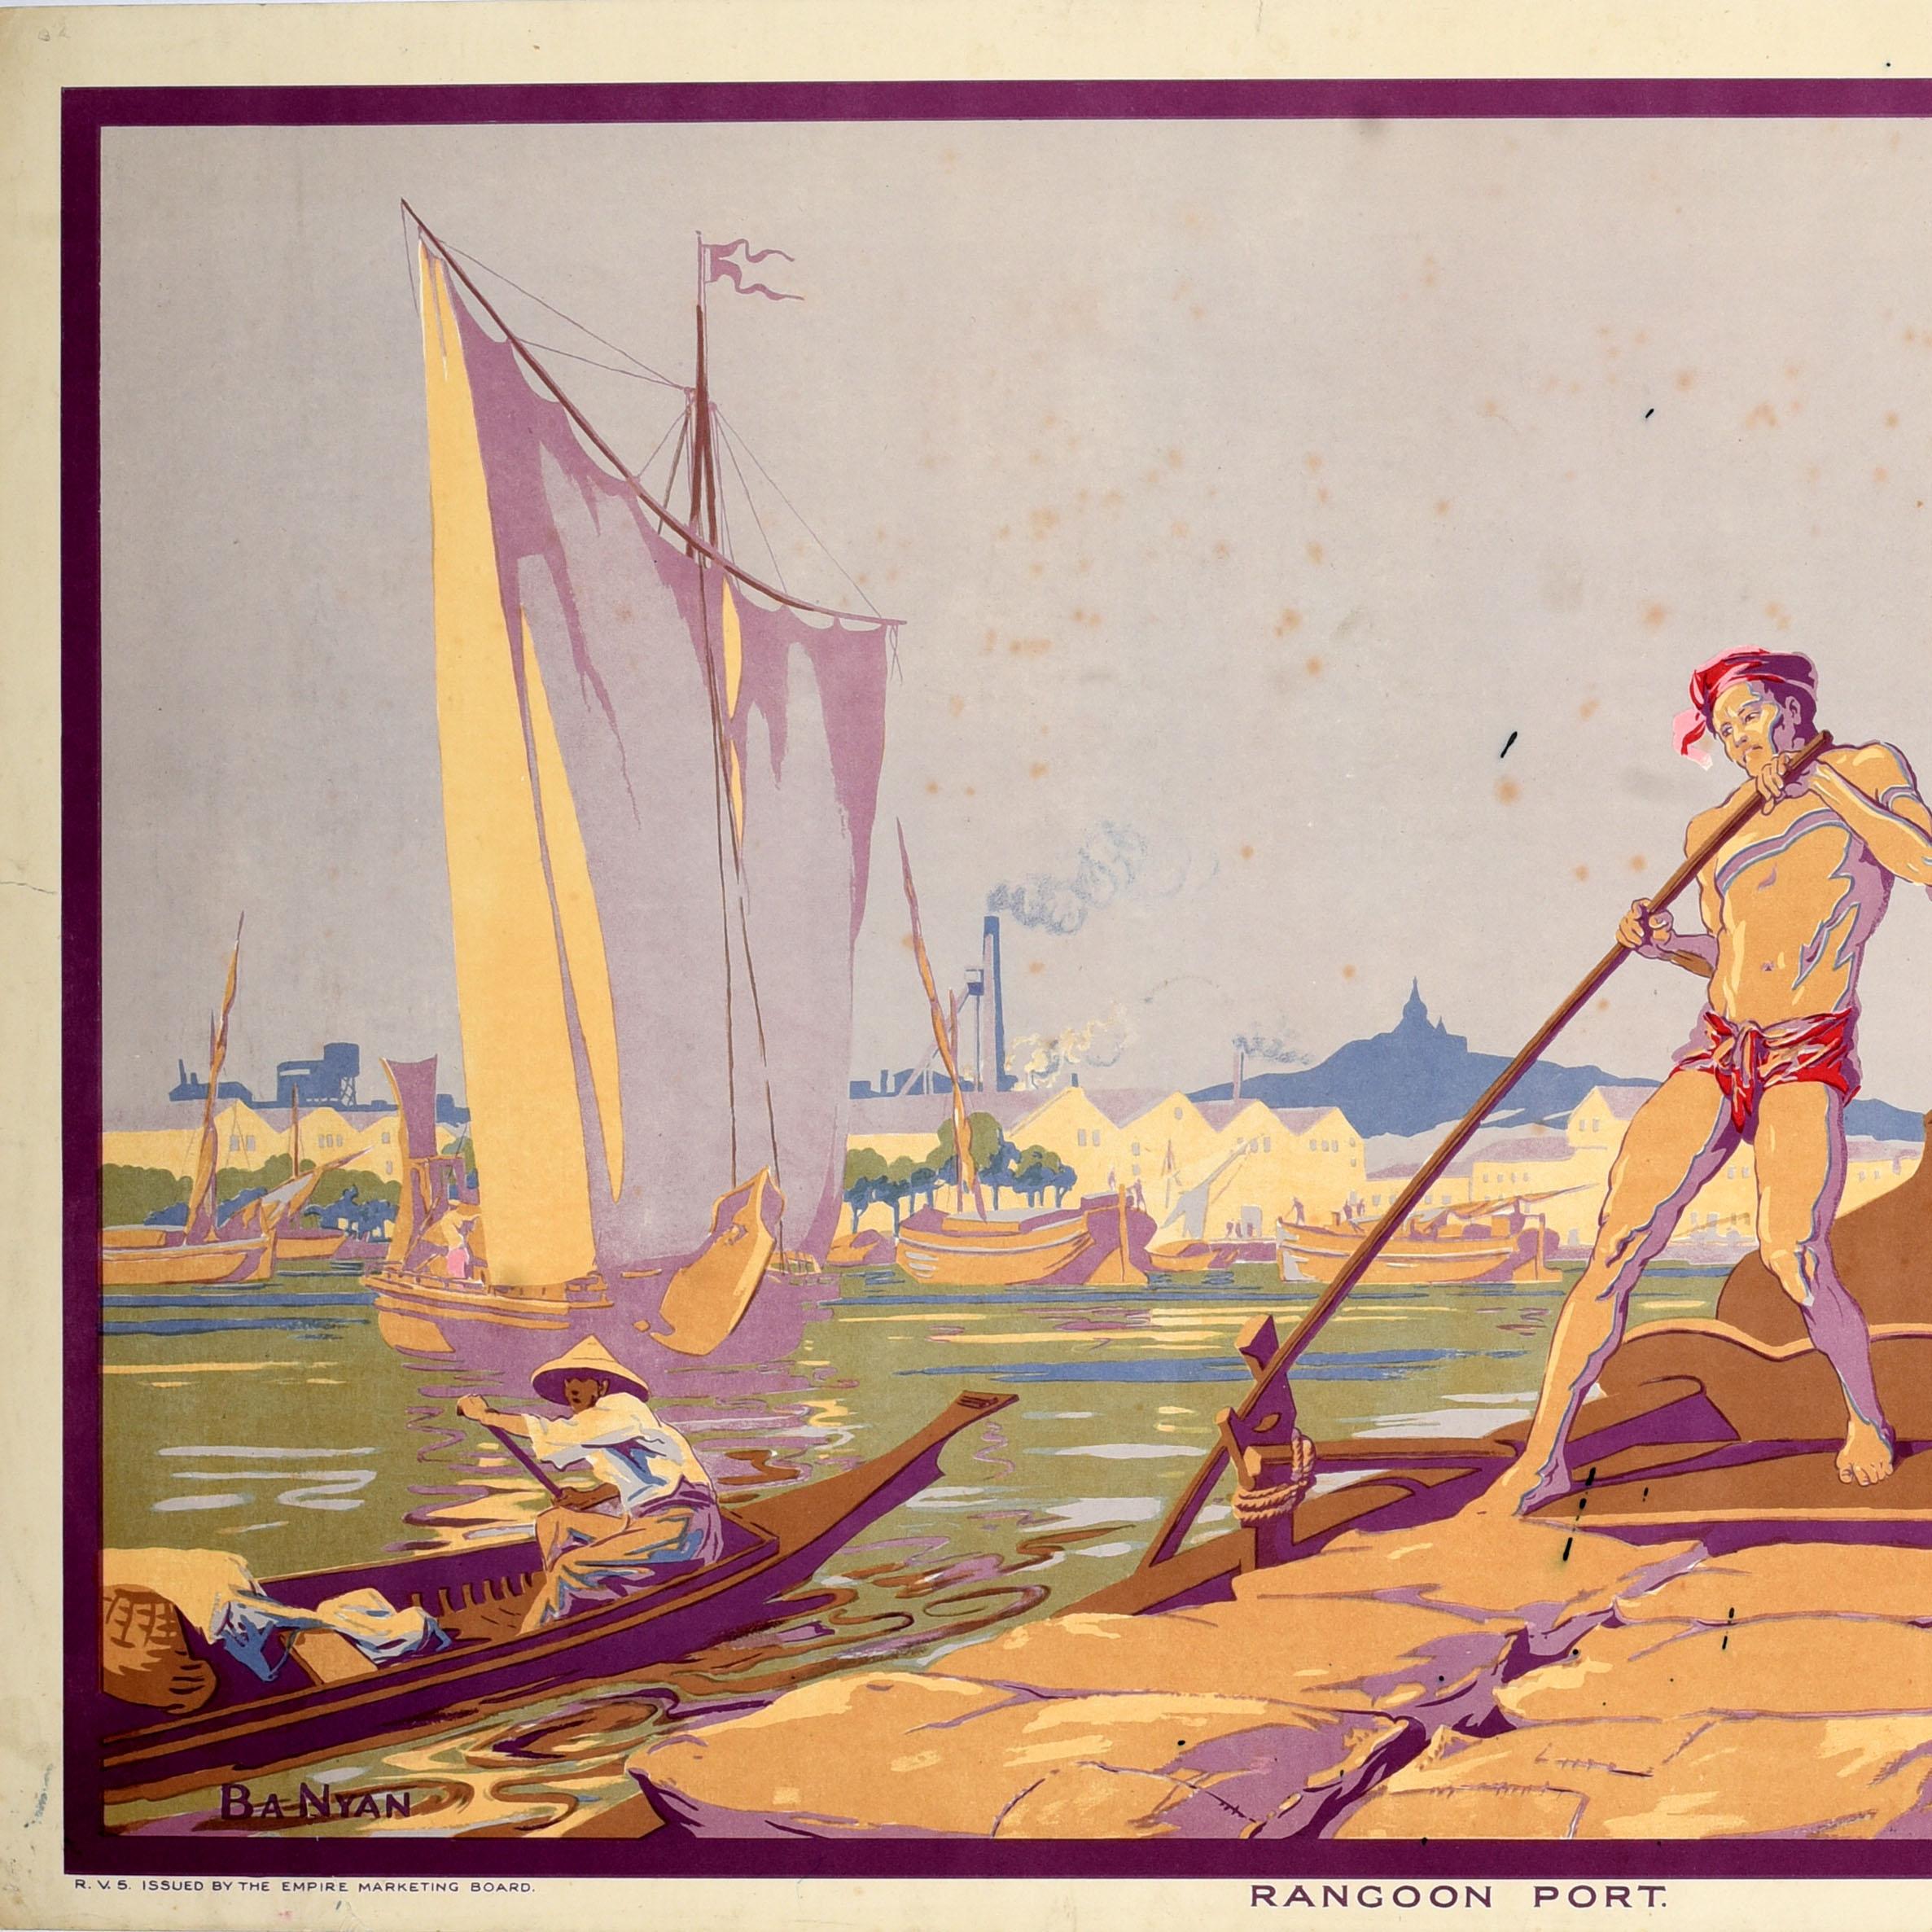 Original vintage poster - Rangoon Port - issued by the Empire Marketing Board (EMB 1926-1933) featuring artwork by the notable Burmese artist Ba Nyan (1897-1945) depicting men rowing wooden cargo boats in the foreground with sailing boats and